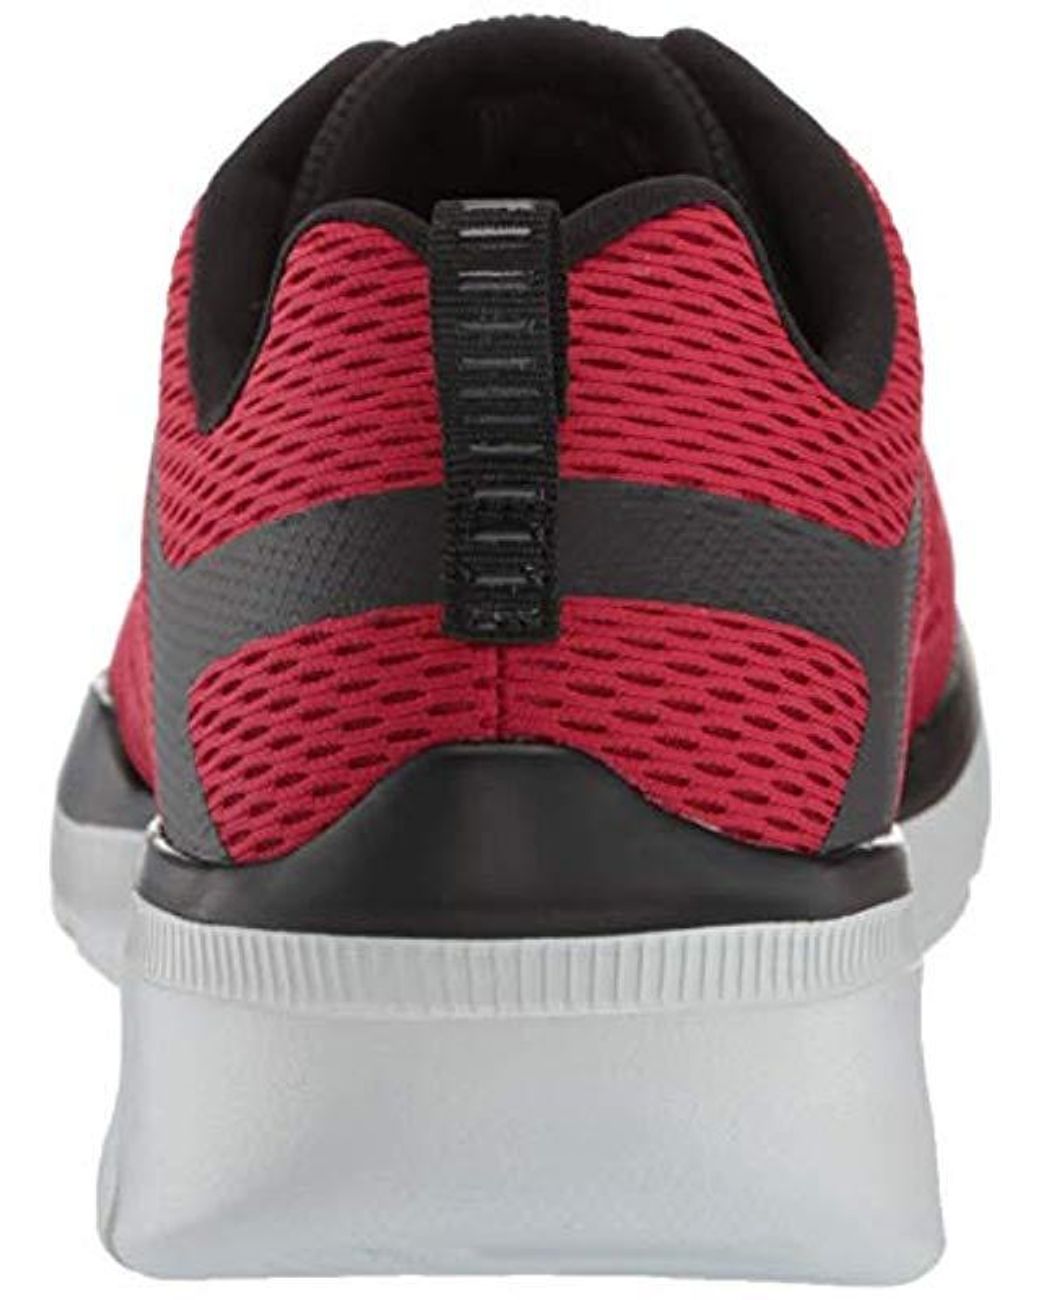 Skechers Synthetic Equalizer 3.0-52927, Low Top Trainers in Red, Black  (Red) for Men | Lyst